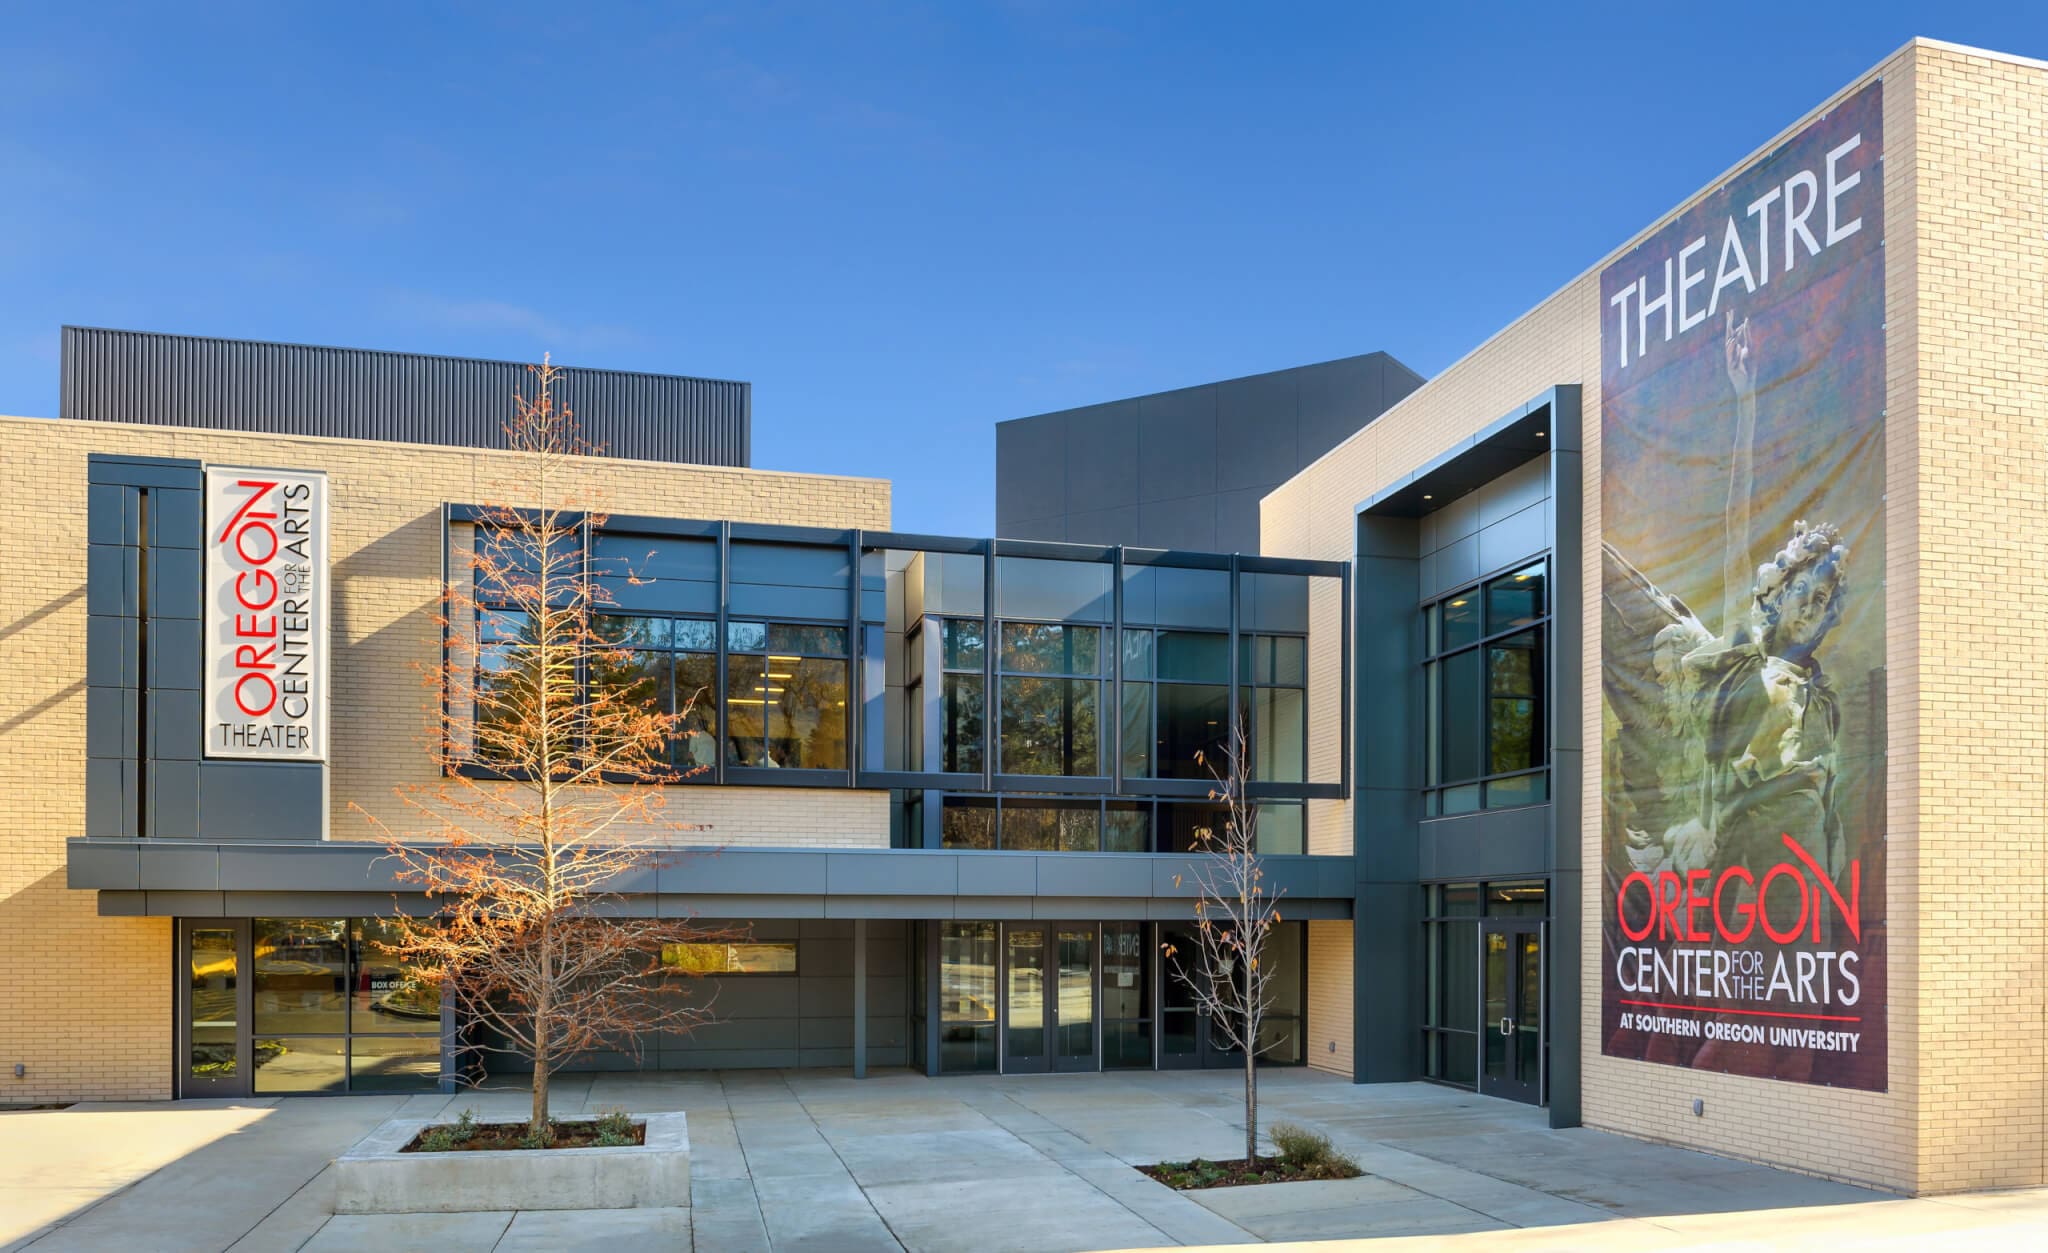 Southern Oregon Unviersity's Theatre and Jefferson Public Radio building. Designed by  TVA Architects constructed by Ausland Group.